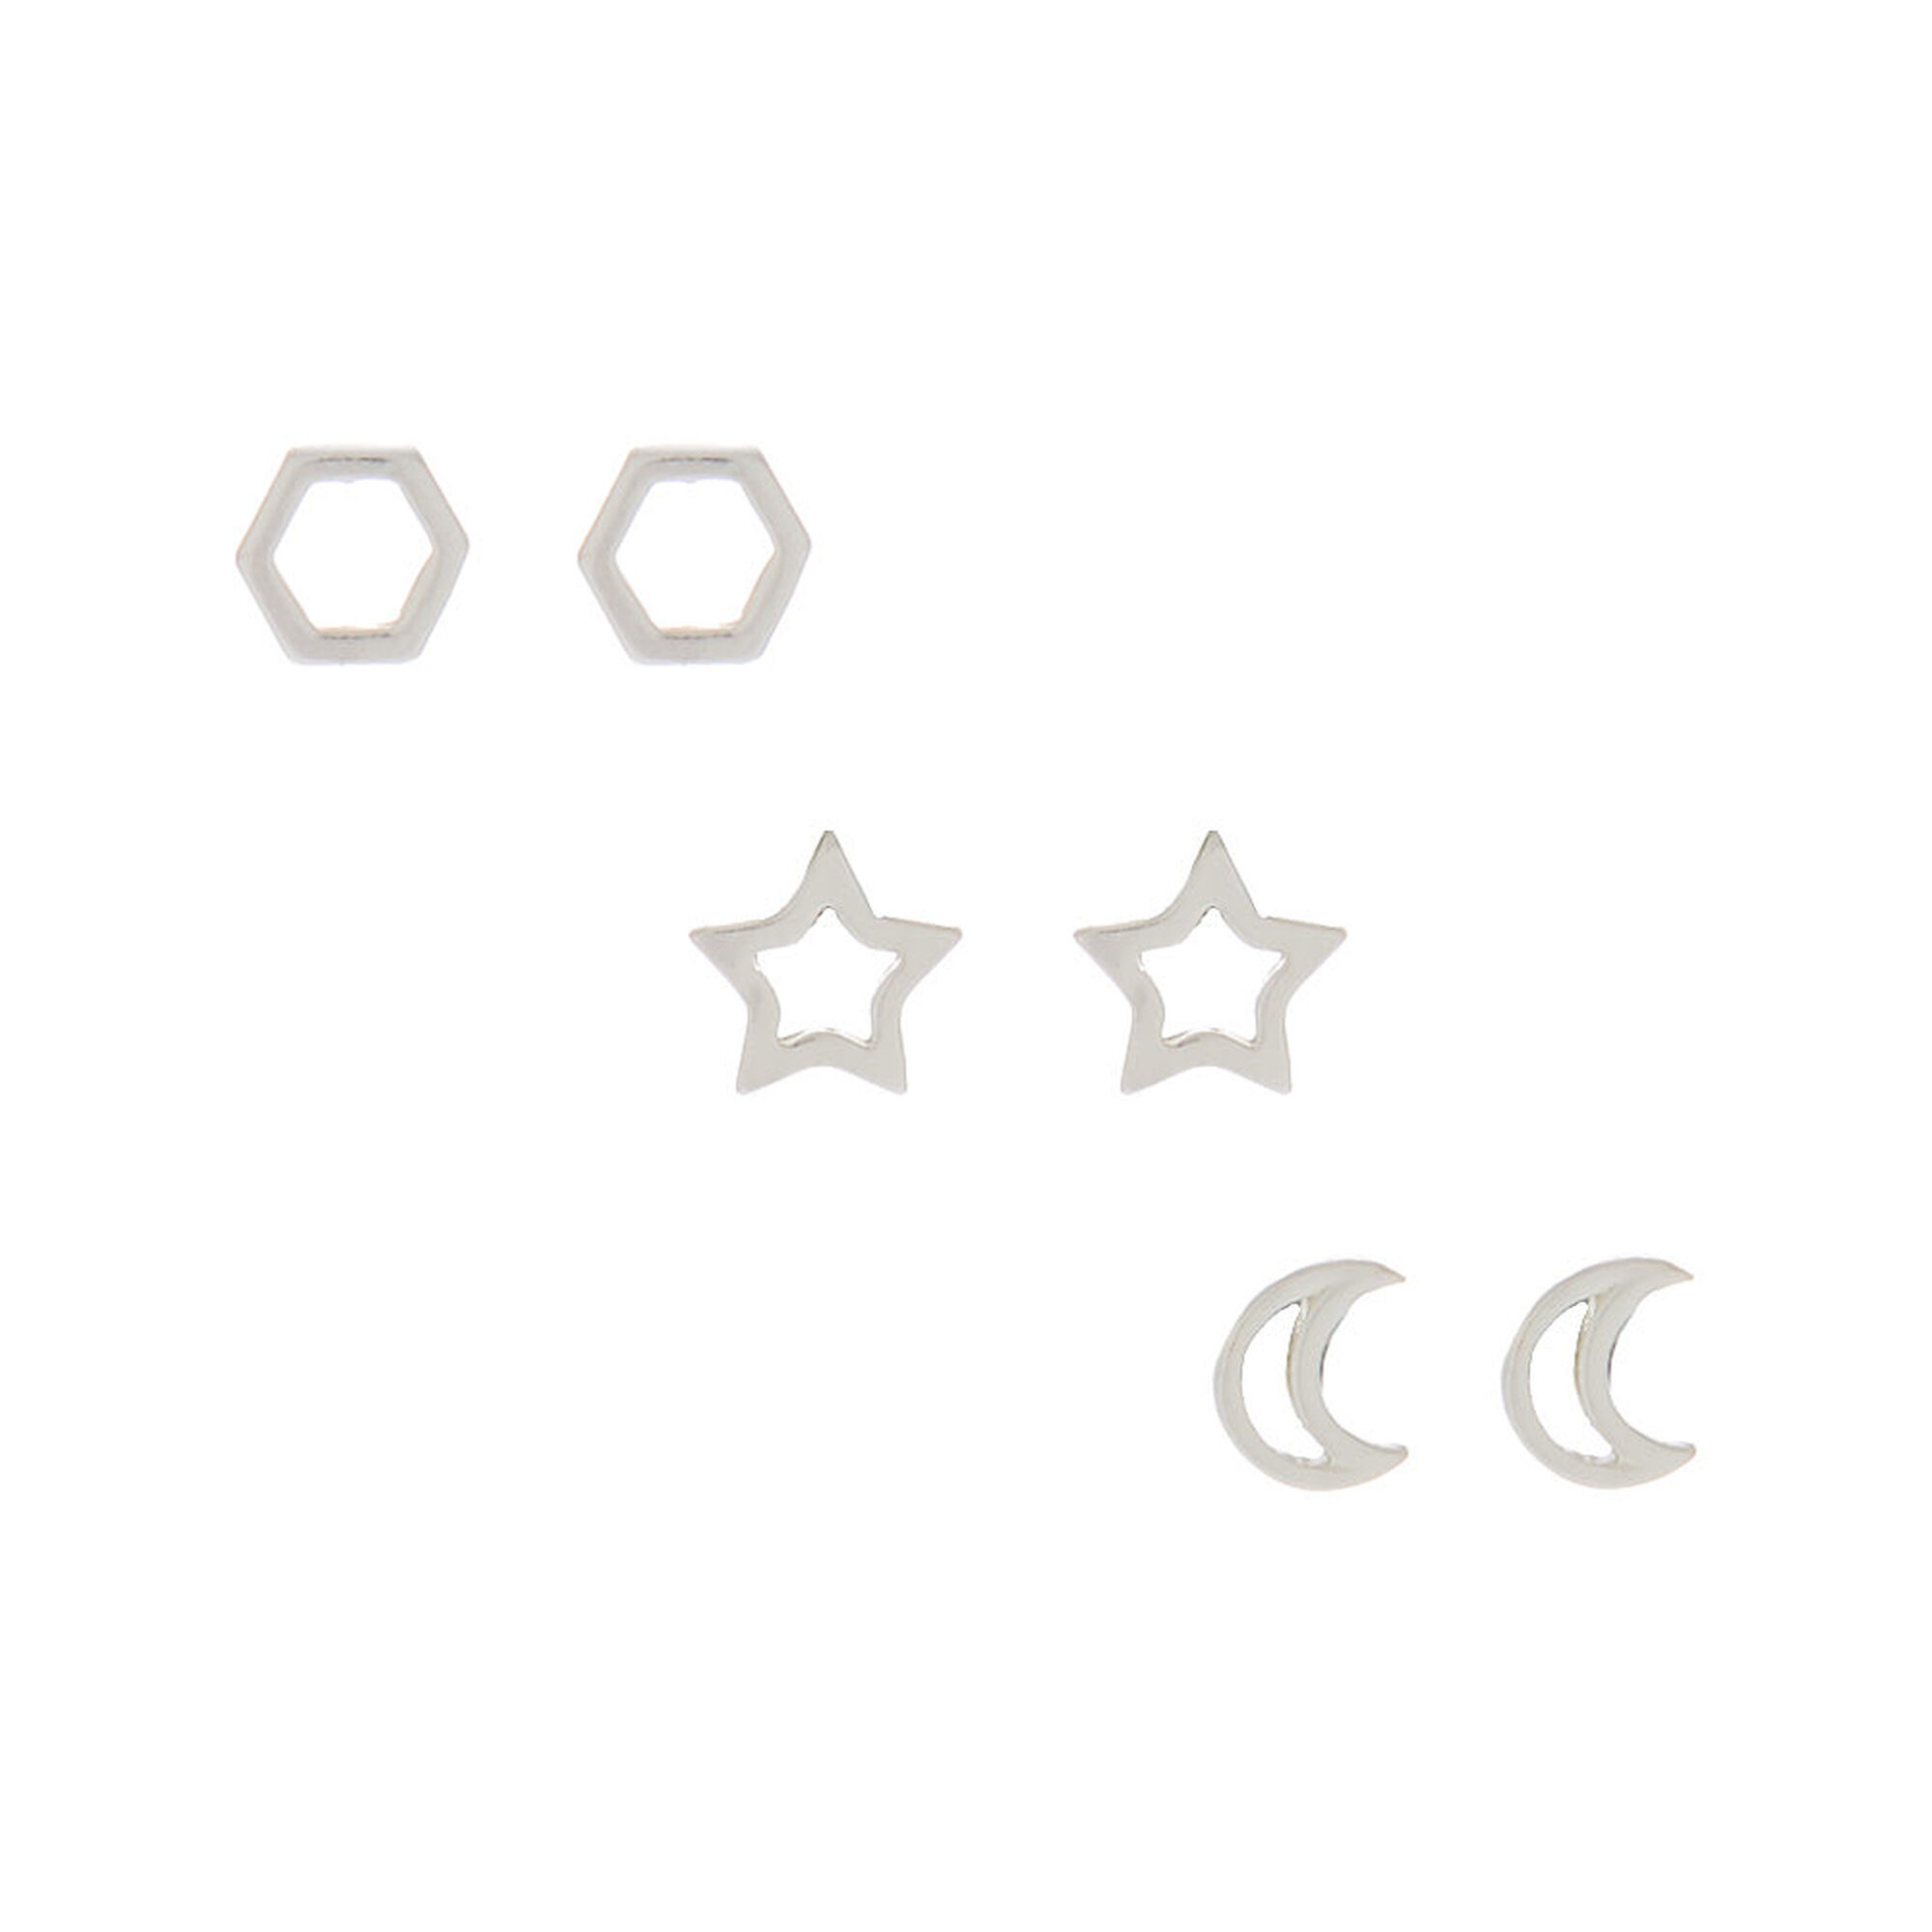 View Claires Celestial Stud Earrings 3 Pack Silver information